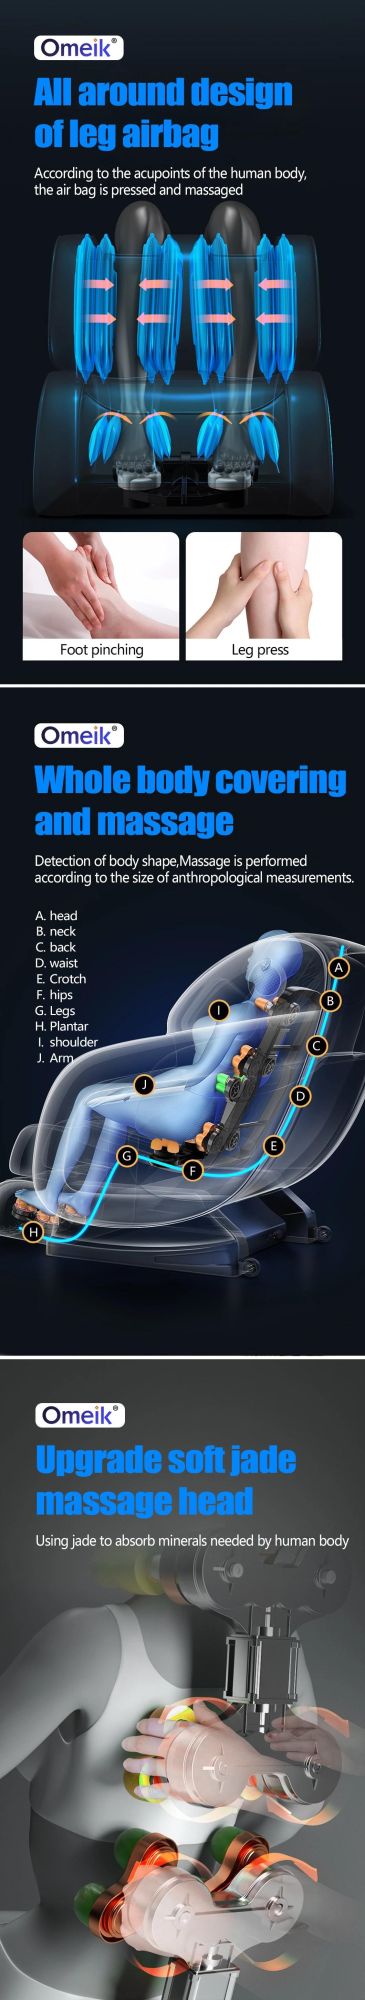 Wholesale Cheap China Industrial Leather Lazy Boy Electric Full Body Robotic Massage Chair Zero Gravity